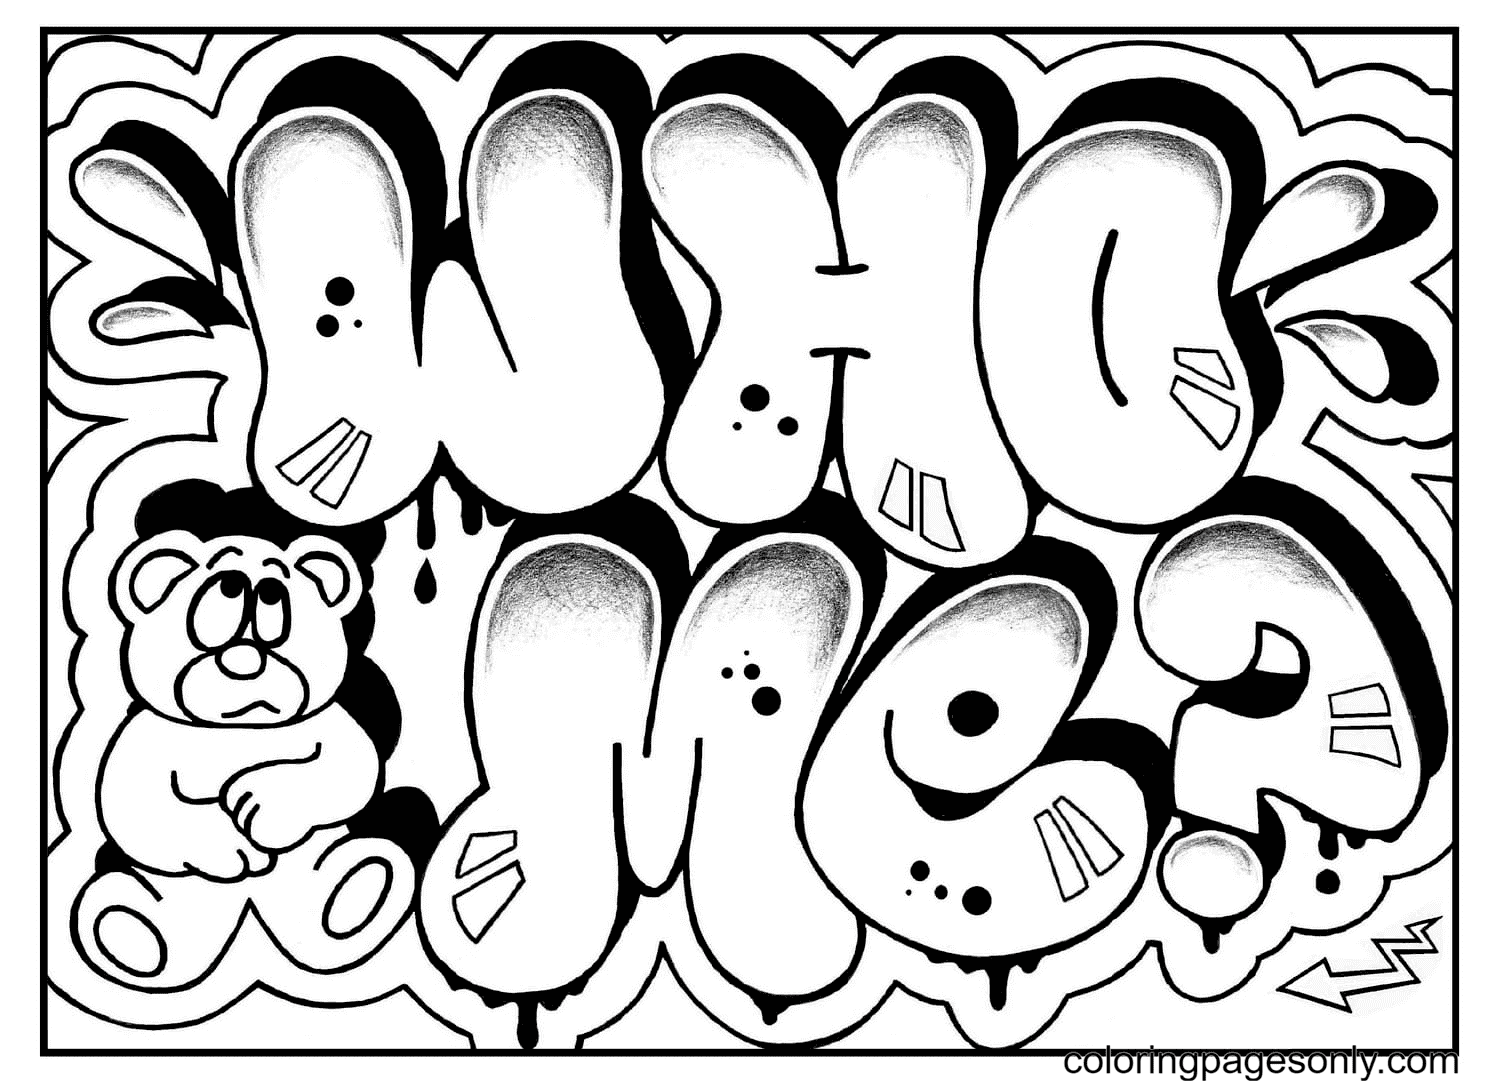 Who me? Coloring Page